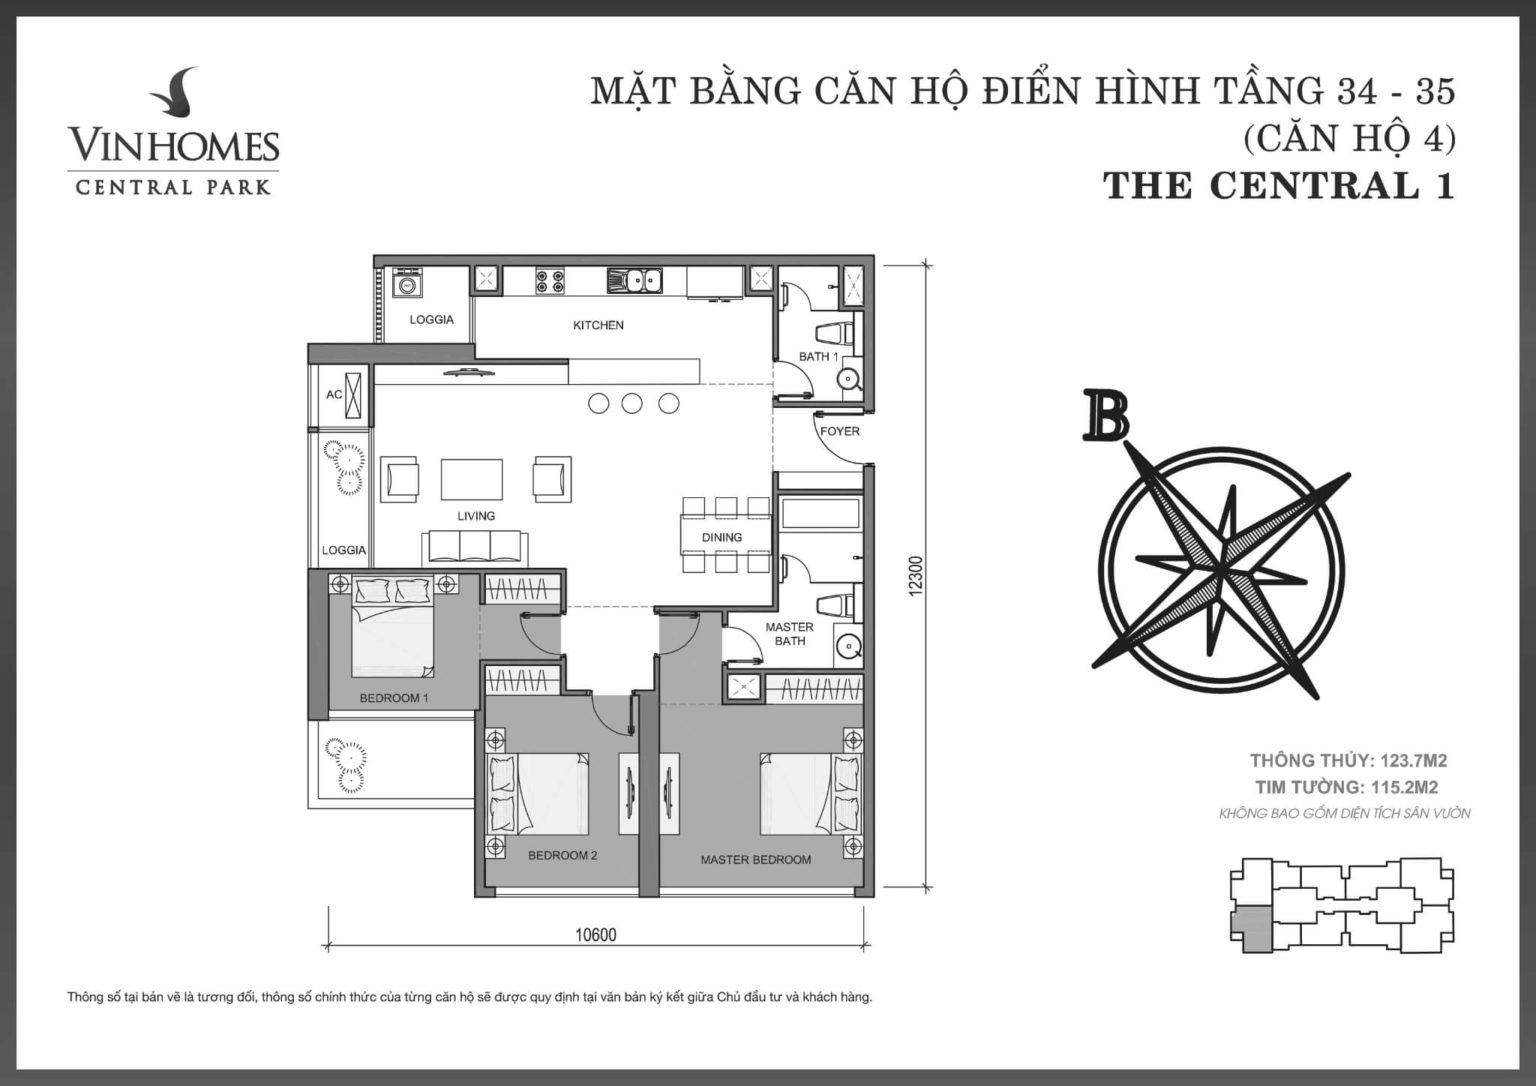 202301/01/08/192500-layout-central-c1-04-tang-34-35-1536x1086.jpg